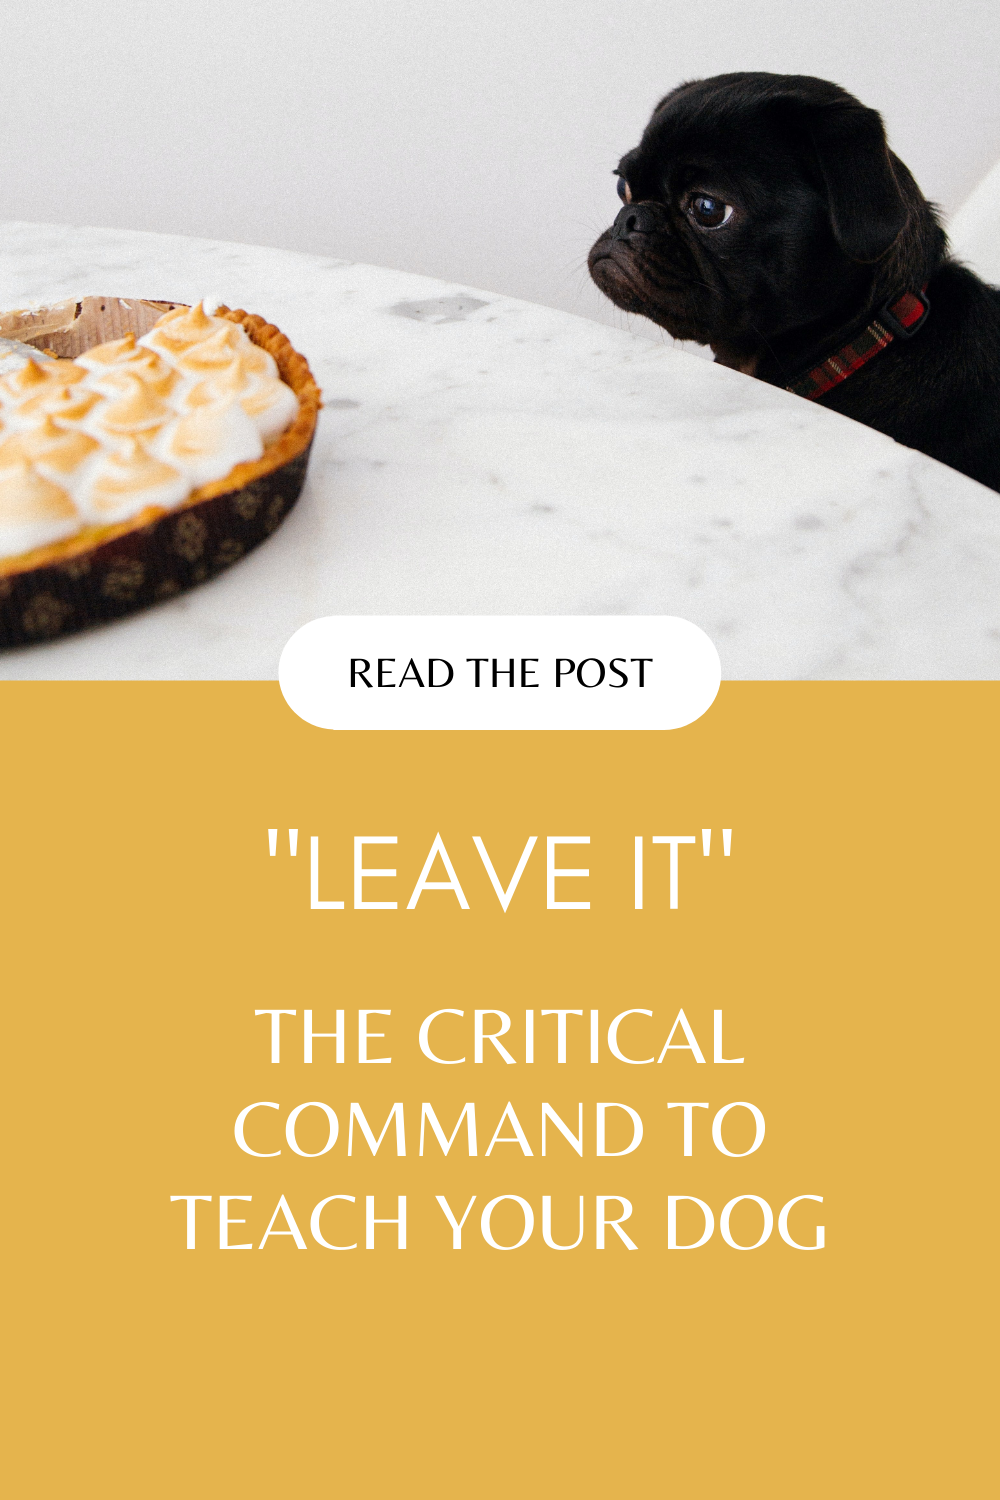 Leave it: a critical command to teach your dog